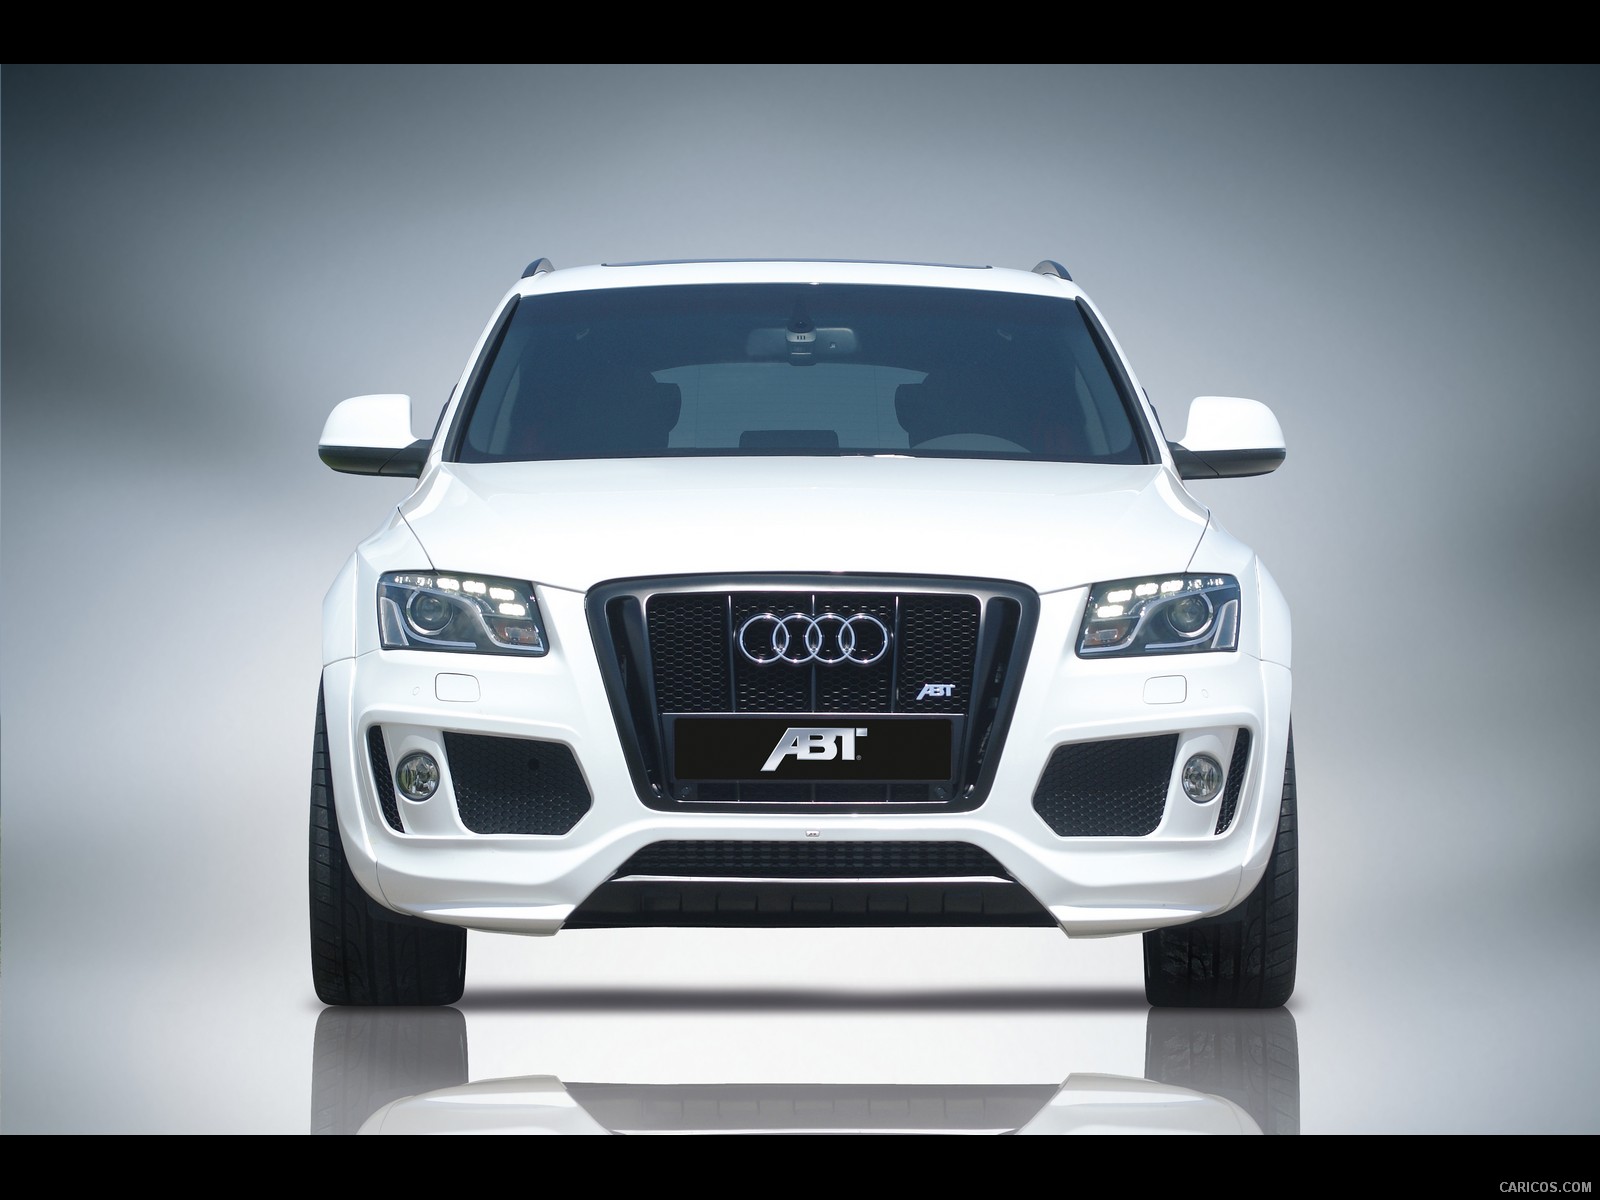 The models of Audi - Q5 and A4